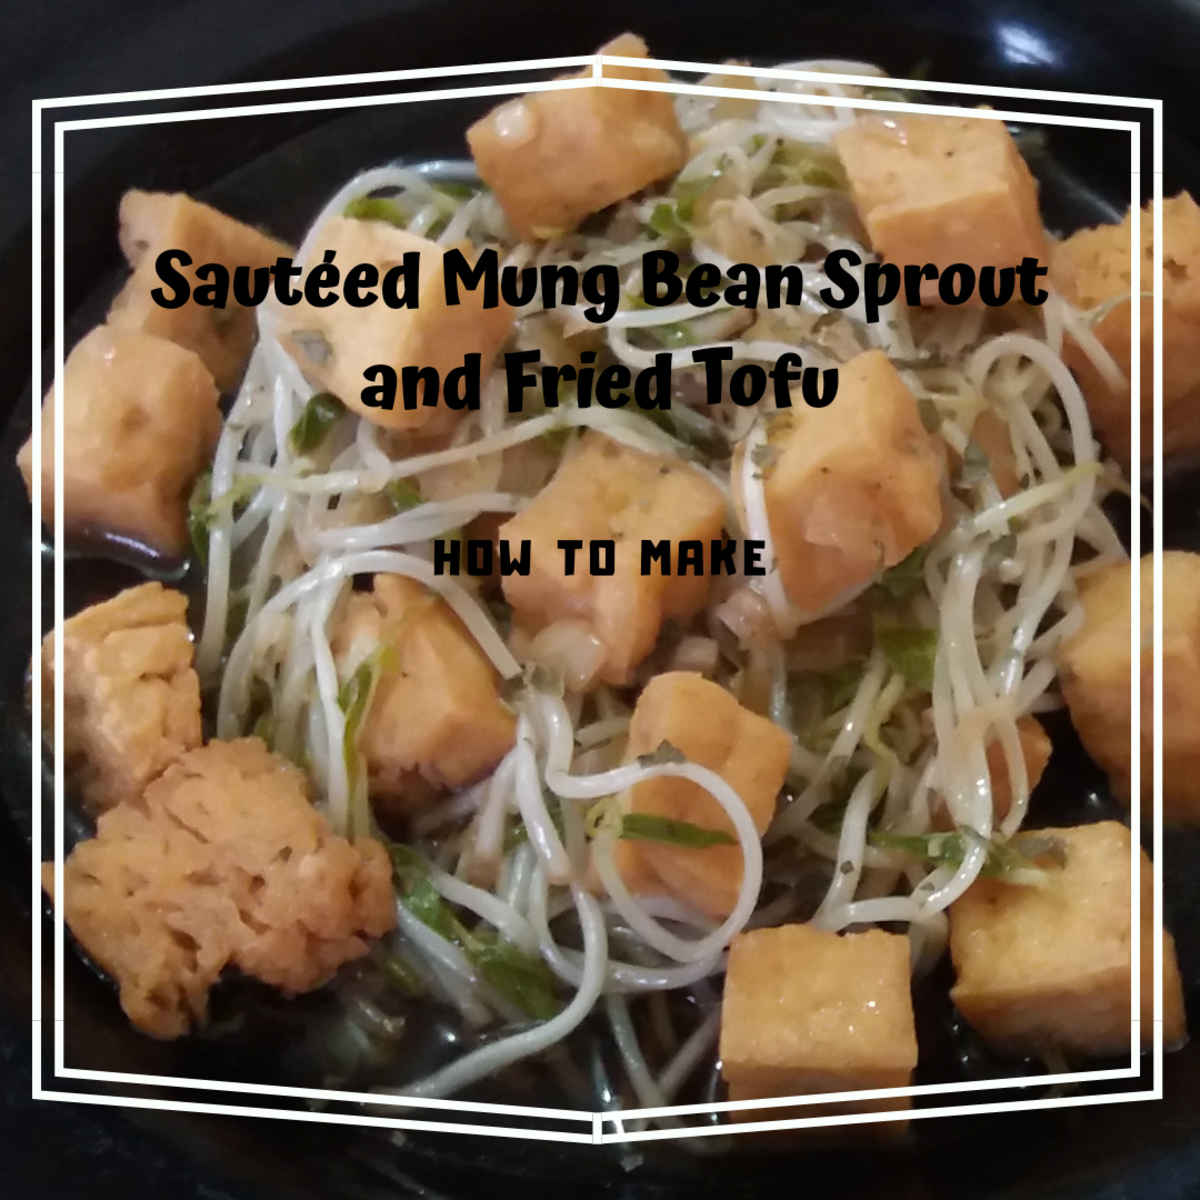 Learn how to make fried tofu with mung bean sprouts